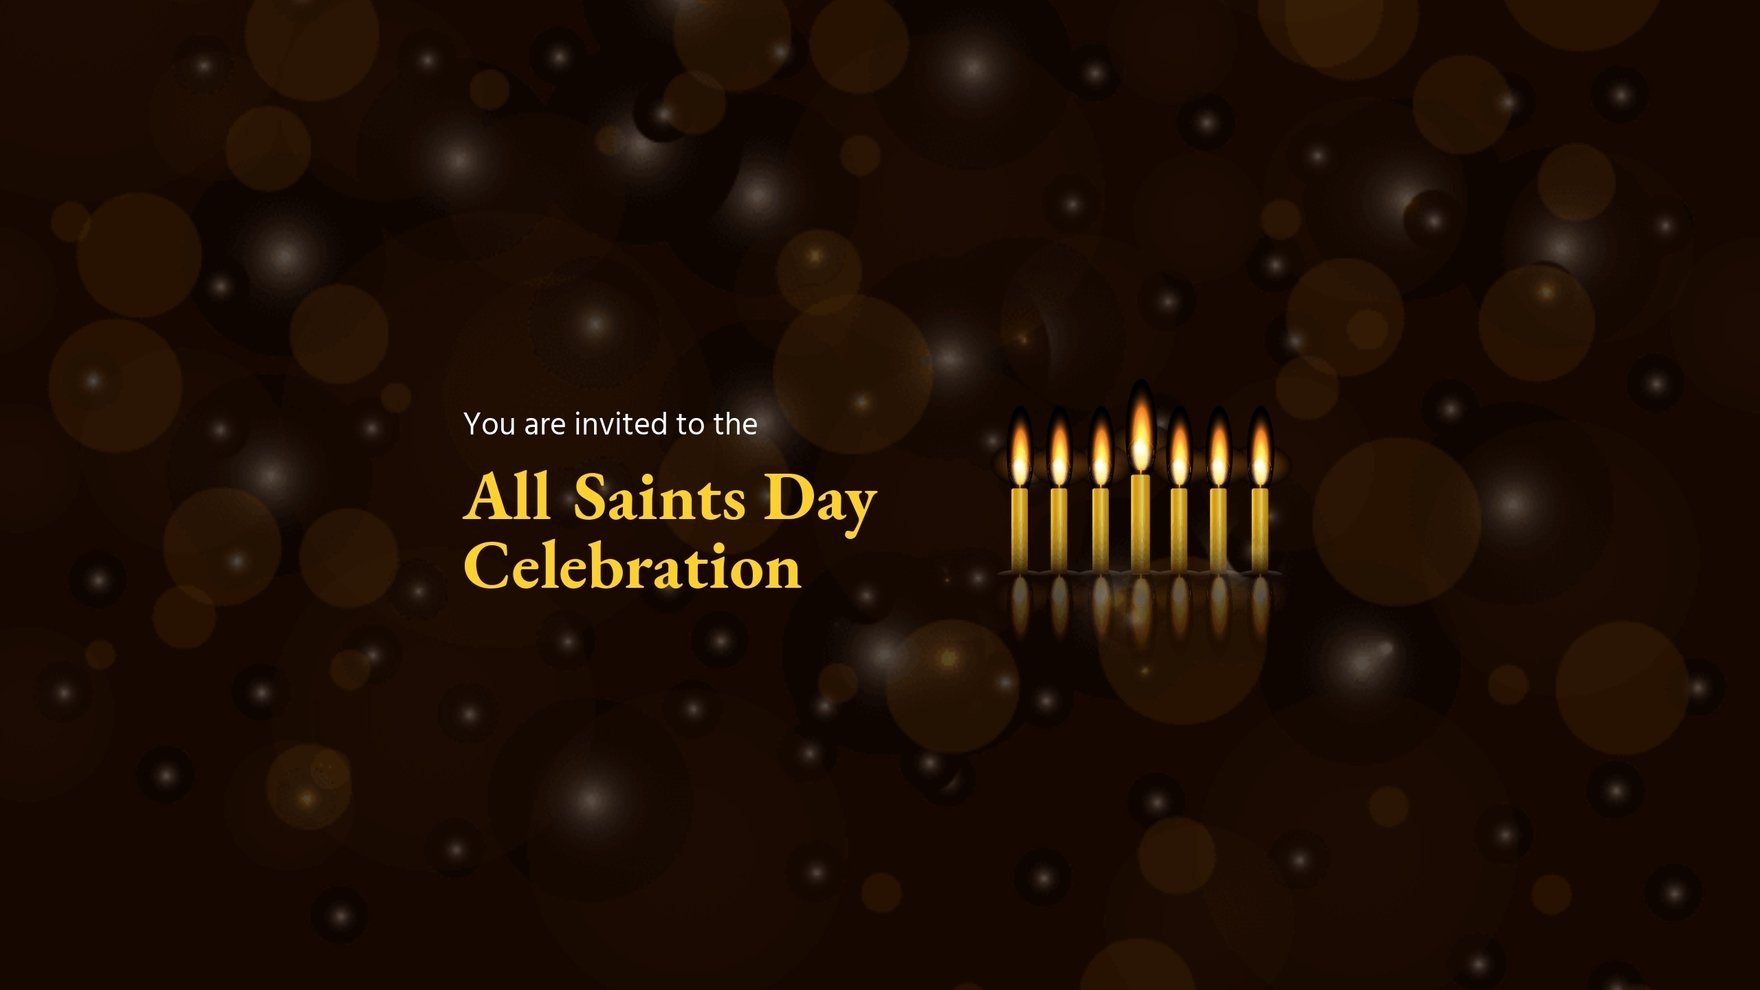 All Saints Day Celebration Youtube Banner Template